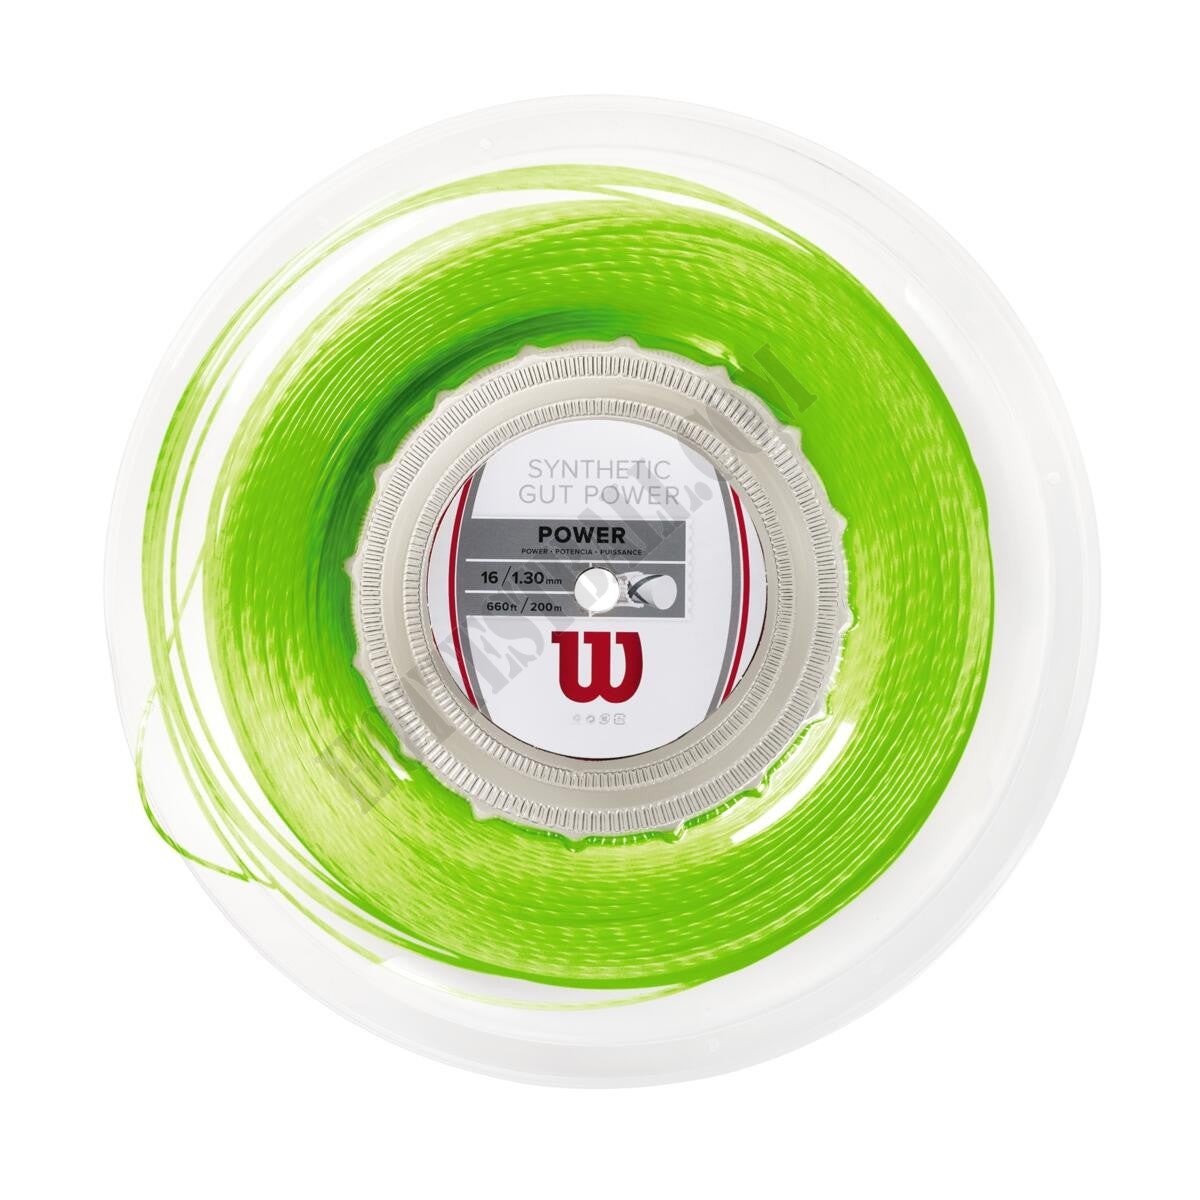 Synthetic Gut Power Tennis String - Set - Wilson Discount Store - -4